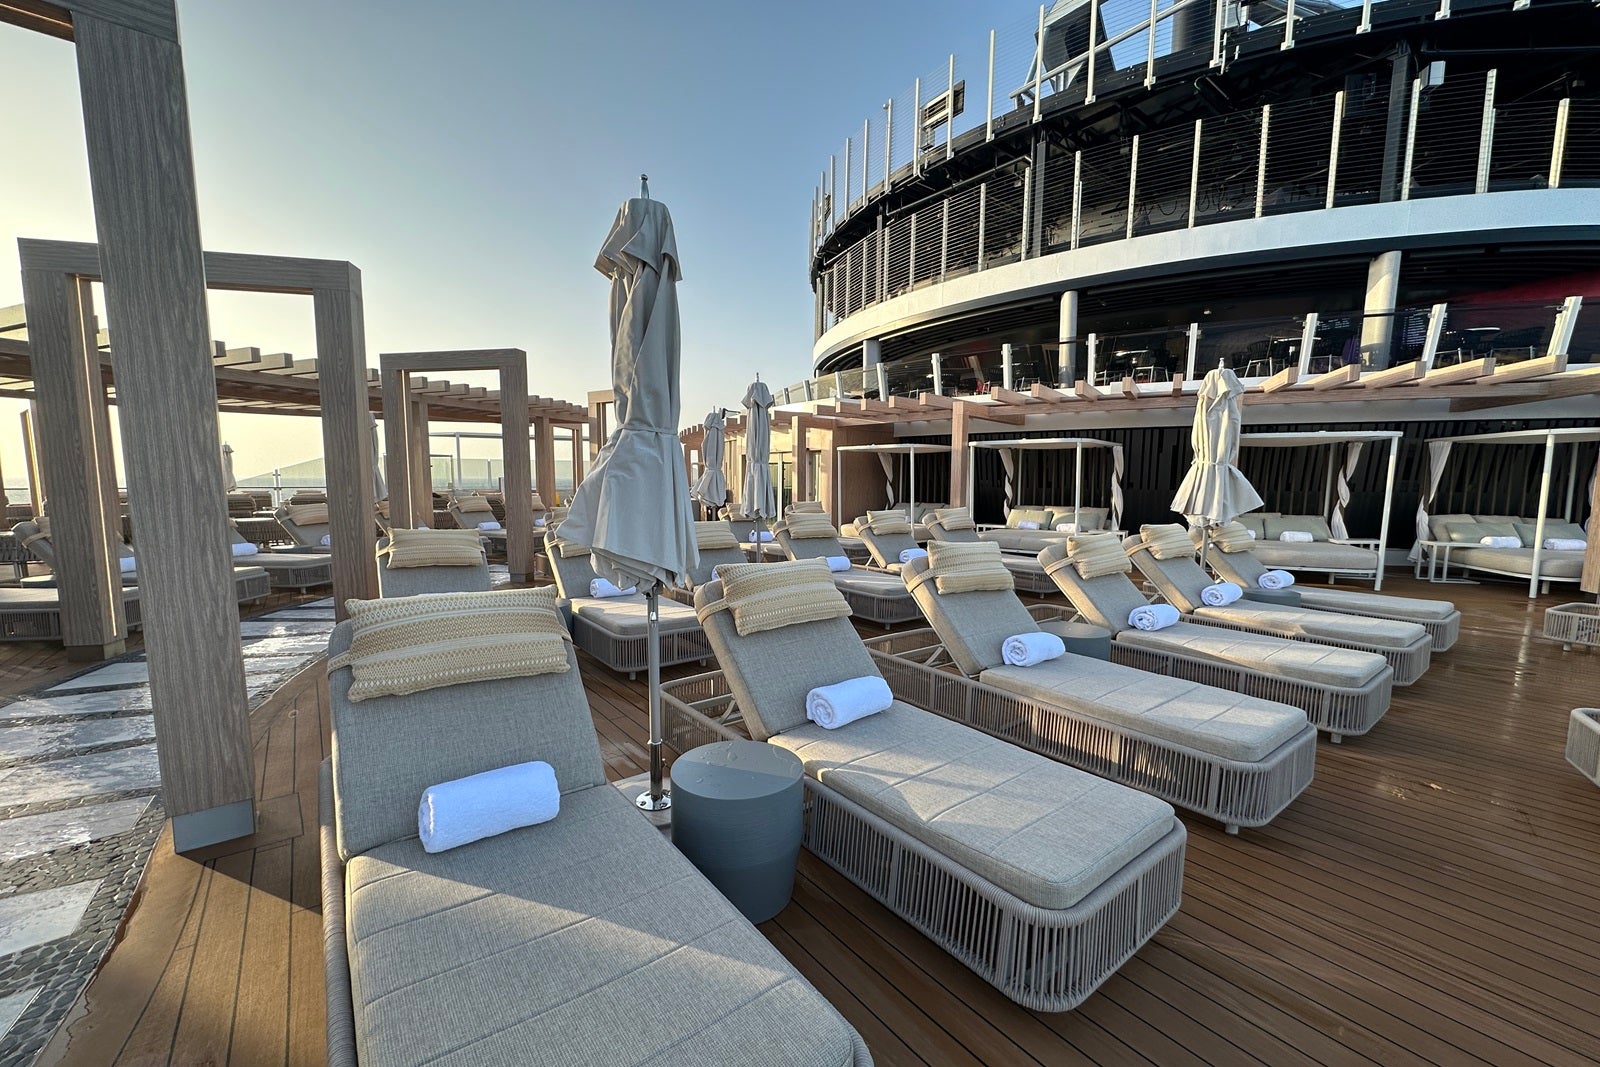 Rows of padded sun loungers in a row next to a walking path on a cruise ship sun deck